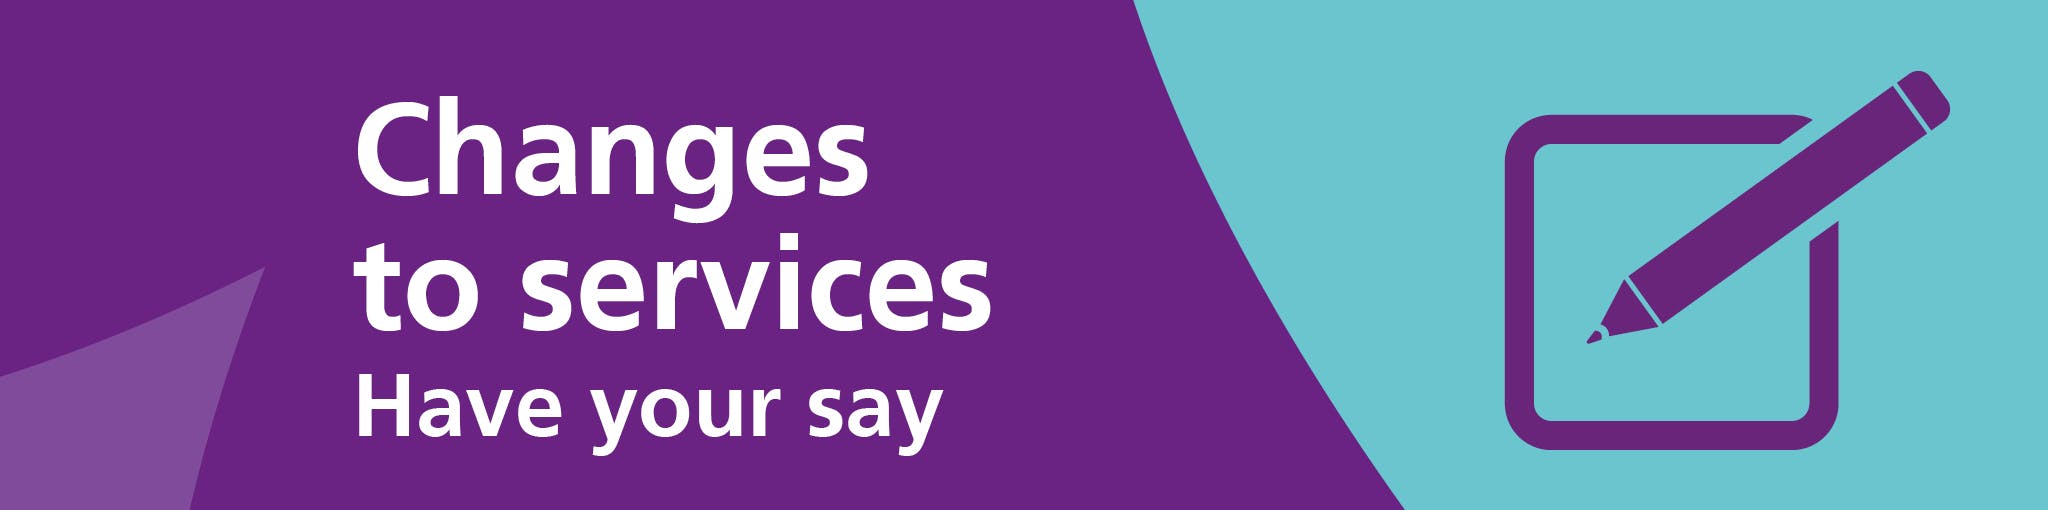 Changes to services have your say